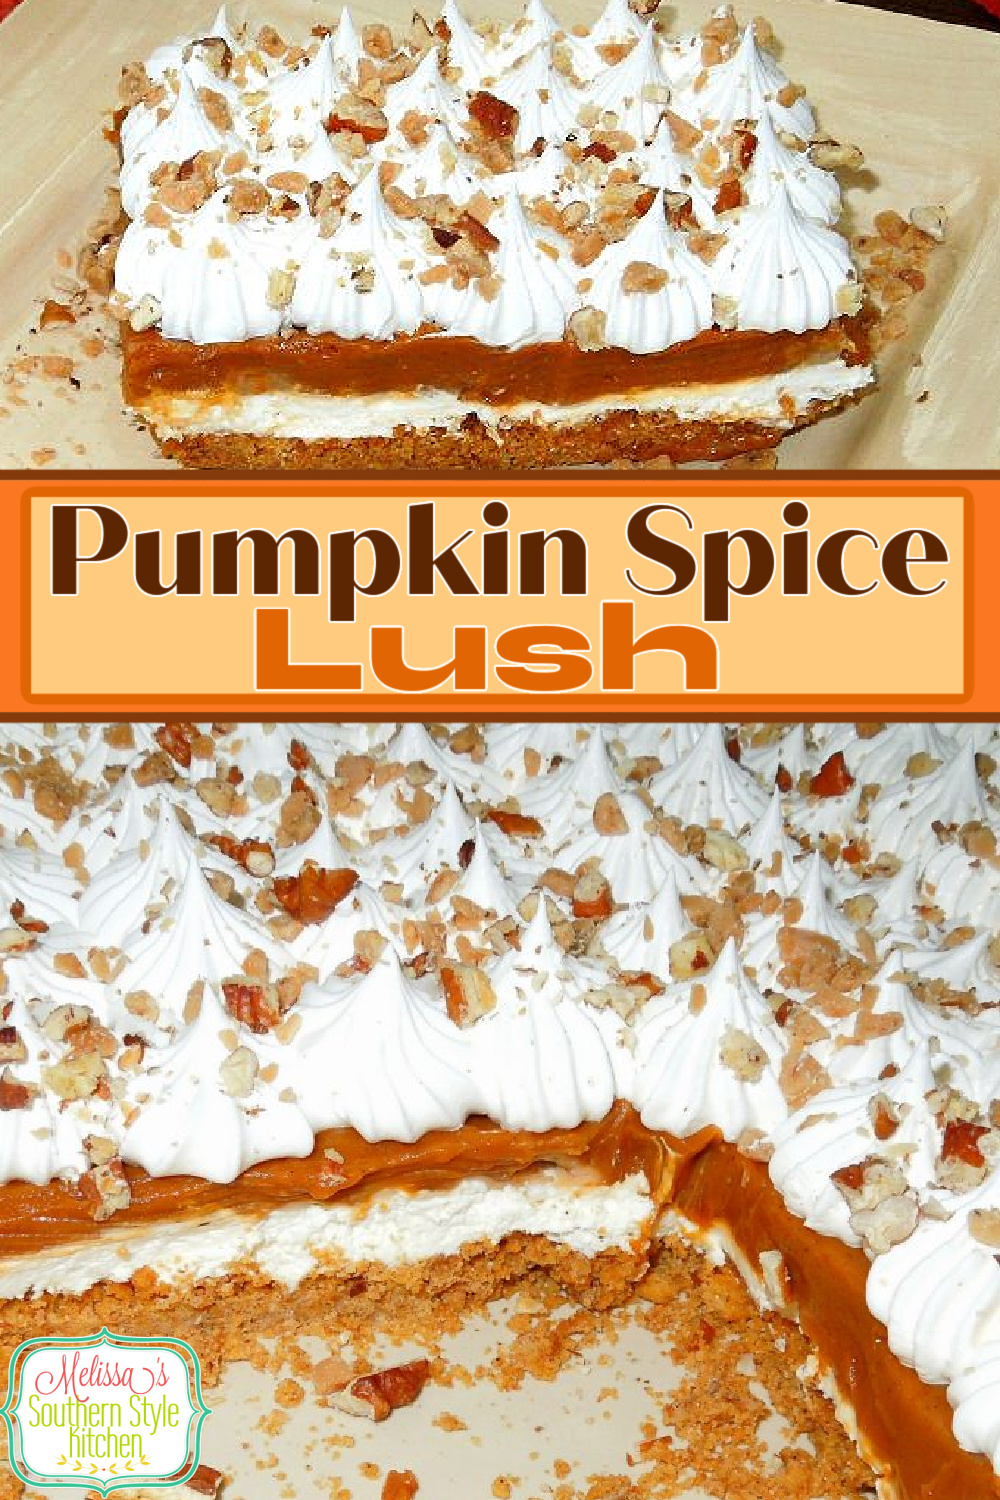 This Pumpkin Spice Layered Lush Dessert is a seasonal spinoff that's a must for your holiday desserts table #pumpkinspice #pumpkinspicelayeredlush #lushrecipes #pumpkin #pumpkinrecipes #thanksgivingrecipes #holidaybaking #thanksgivingdesserts #lush #southernfood #southernrecipes via @melissasssk